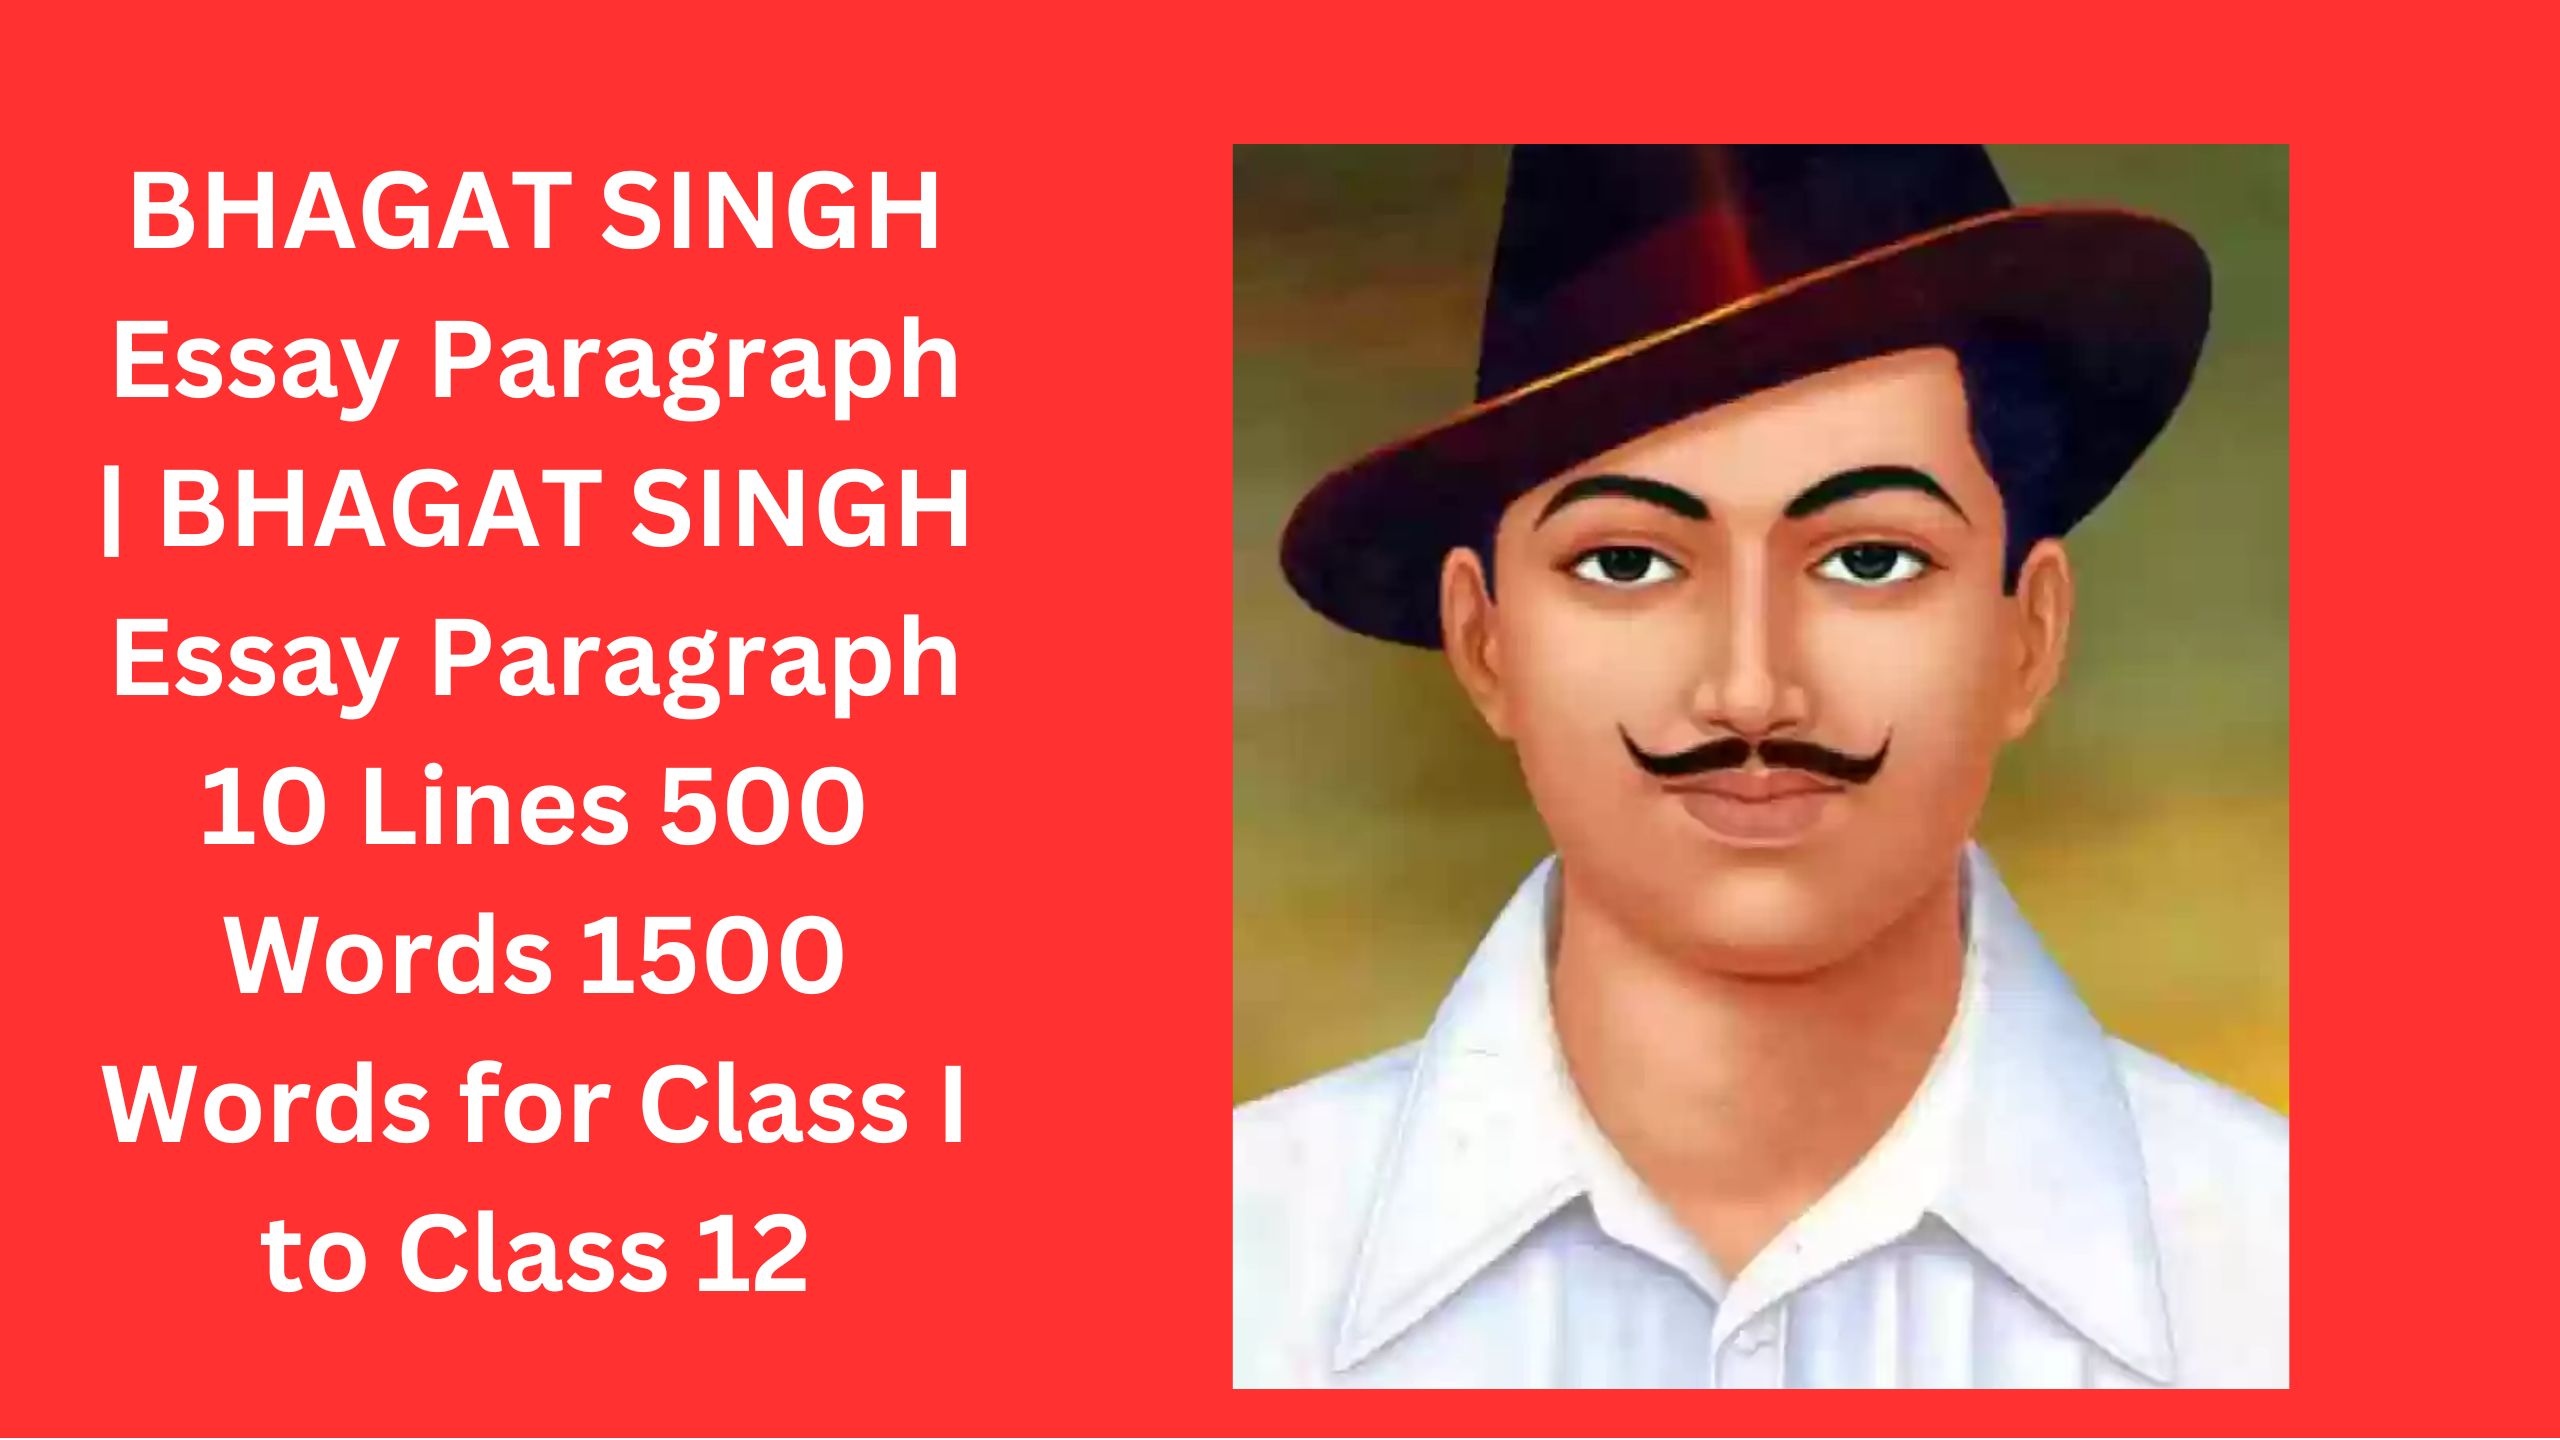 You are currently viewing BHAGAT SINGH  Essay Paragraph | BHAGAT SINGH Essay Paragraph 10 Lines 500 Words 1500 Words